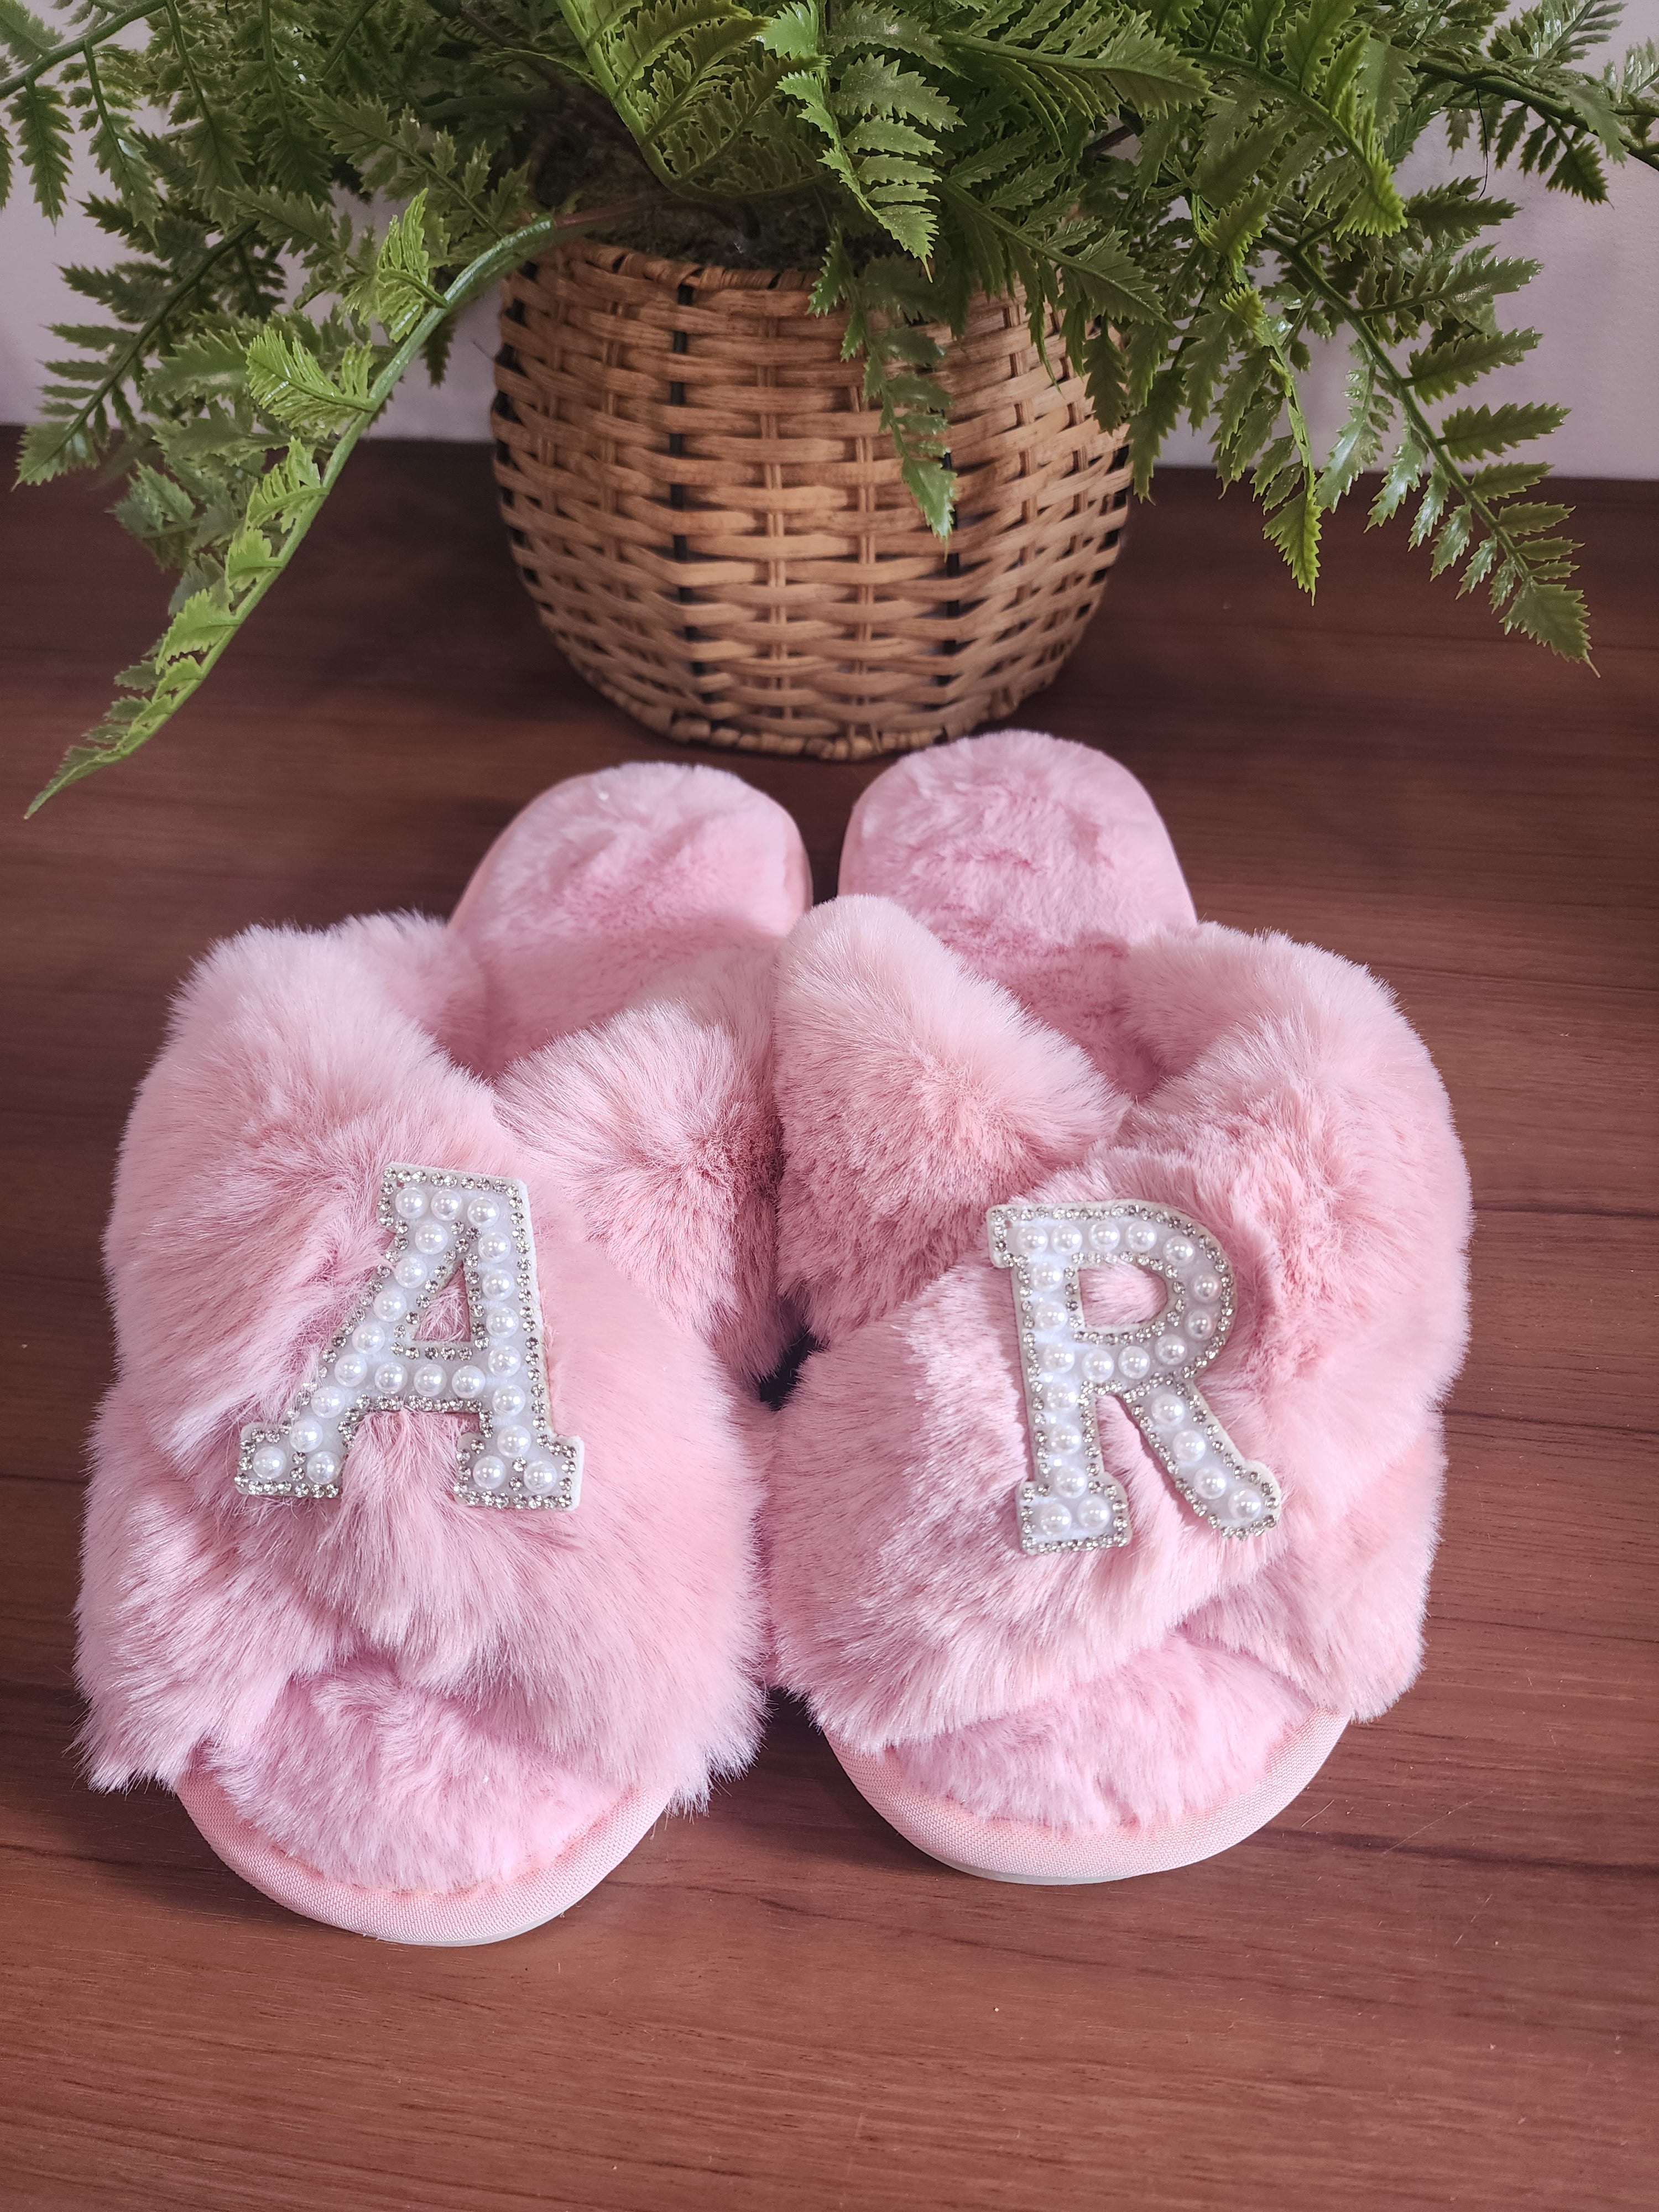 Women's Fuzzy Memory Foam Letter Patch Slippers: Personalized Women’s Slippers 5-6 / Gray / Rhinestone and Pearl